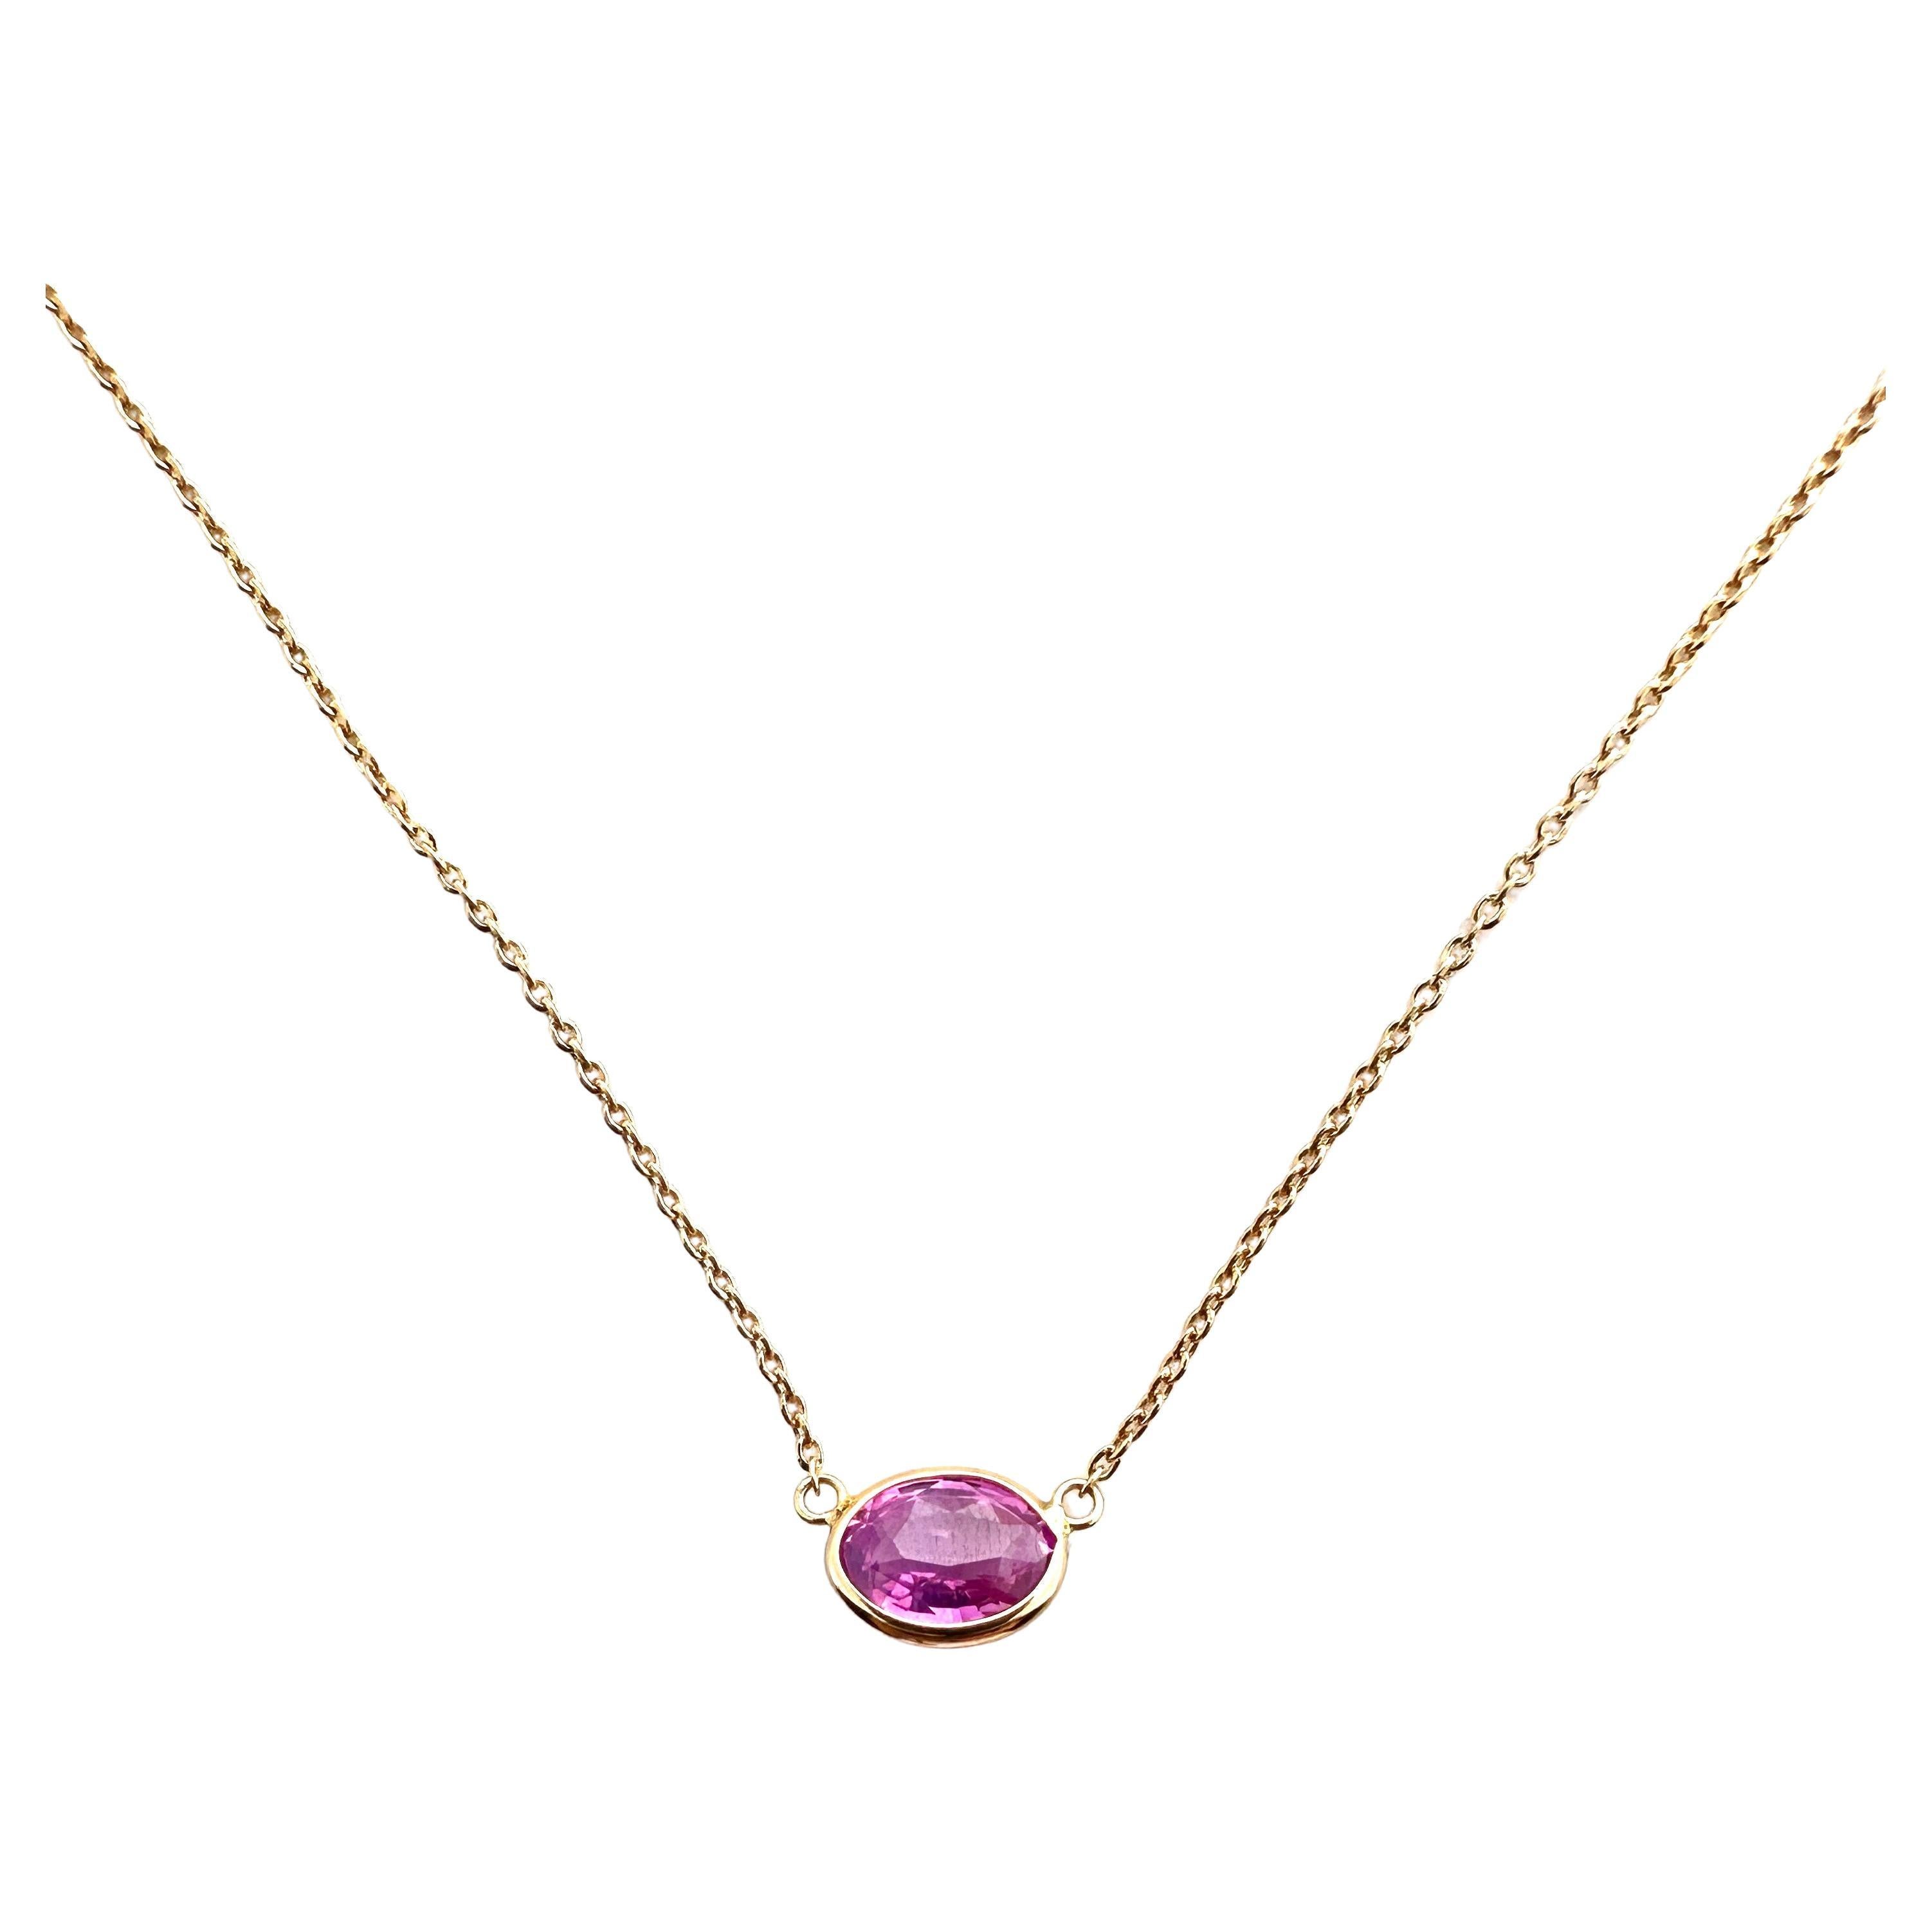 1.74 Carat Pink Sapphire Oval & Fashion Necklaces Berberyn Certified In 14K RG For Sale